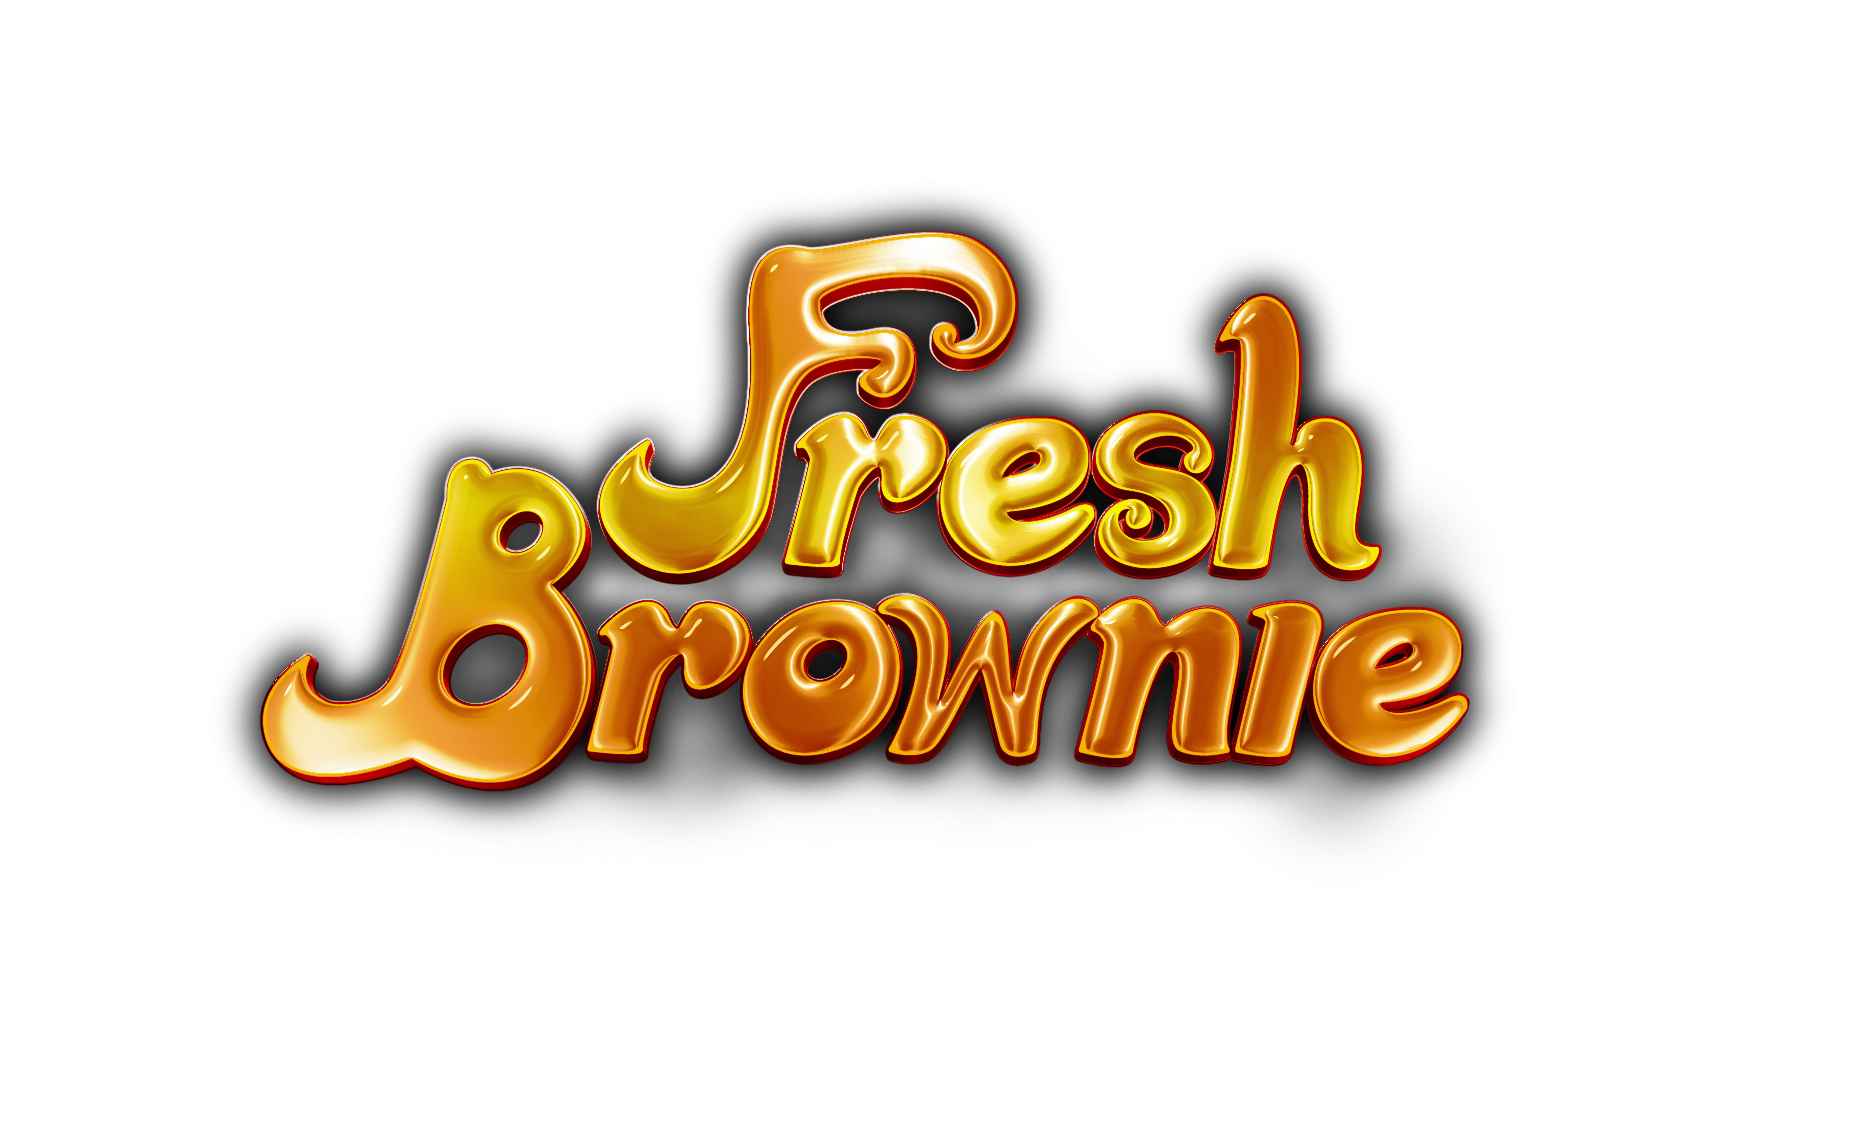 Fresh Brownie Productions